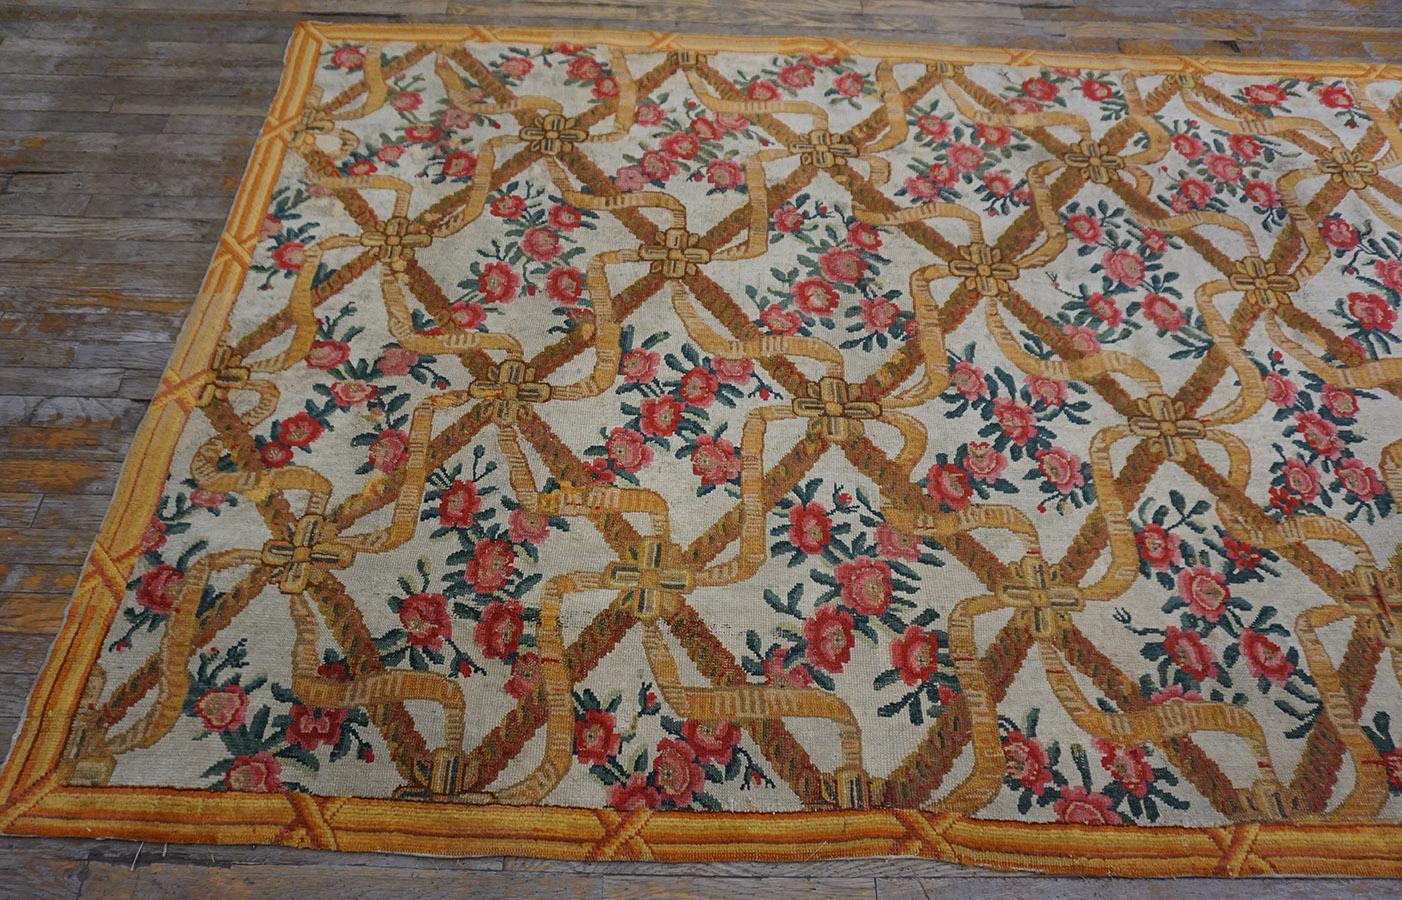 Wool 18th Century French Savonnerie Carpet ( 5'6